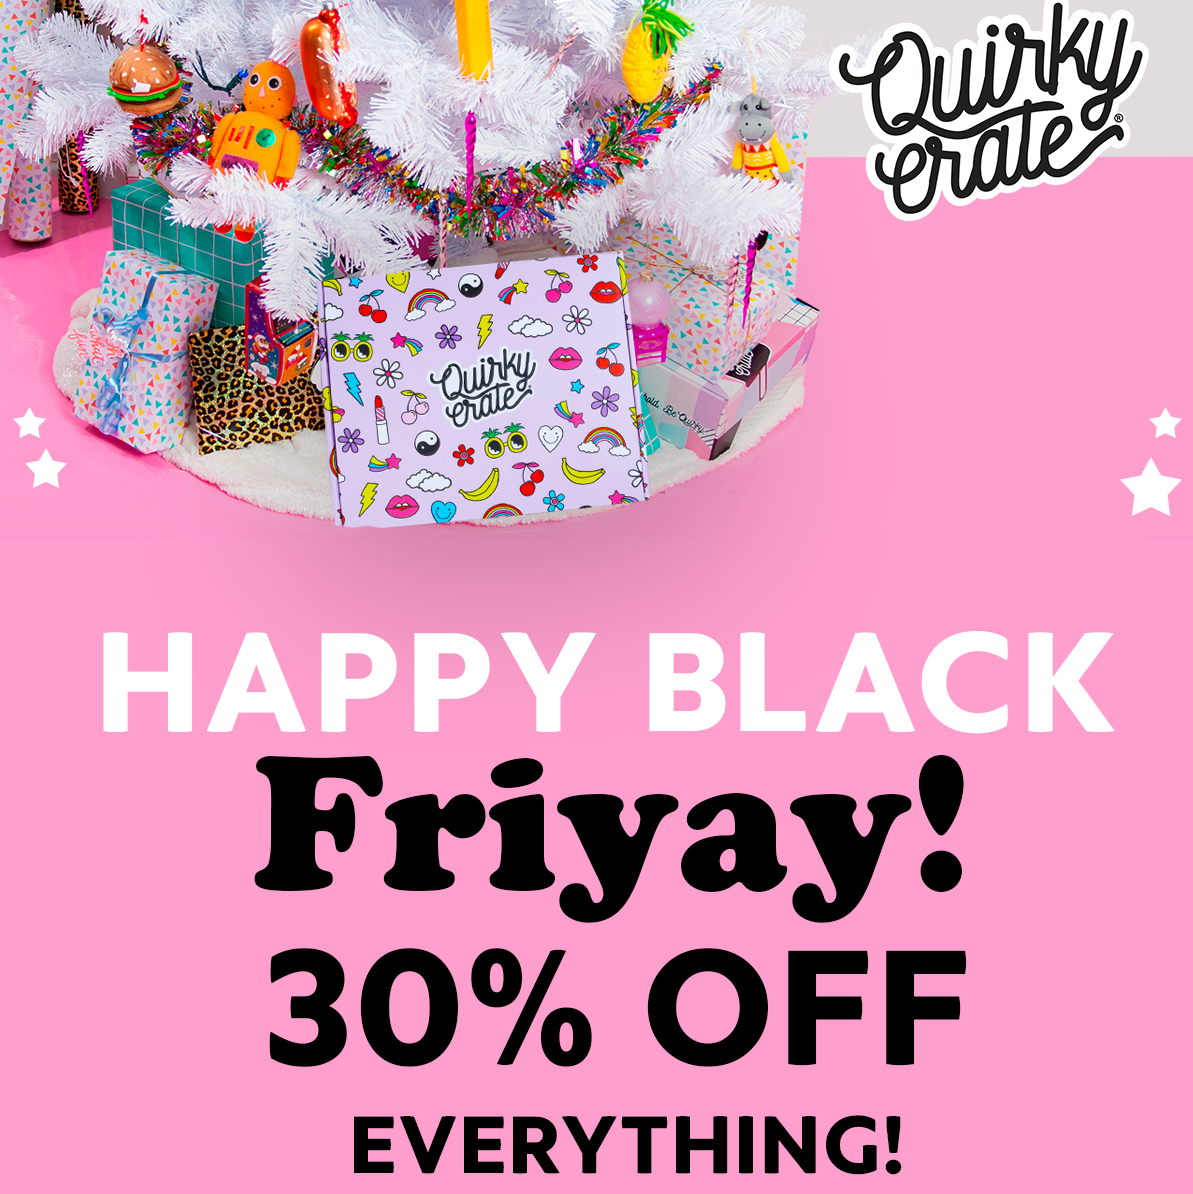 Quirky Crate Black Friday Deal – Save 30% Off Sitewide!